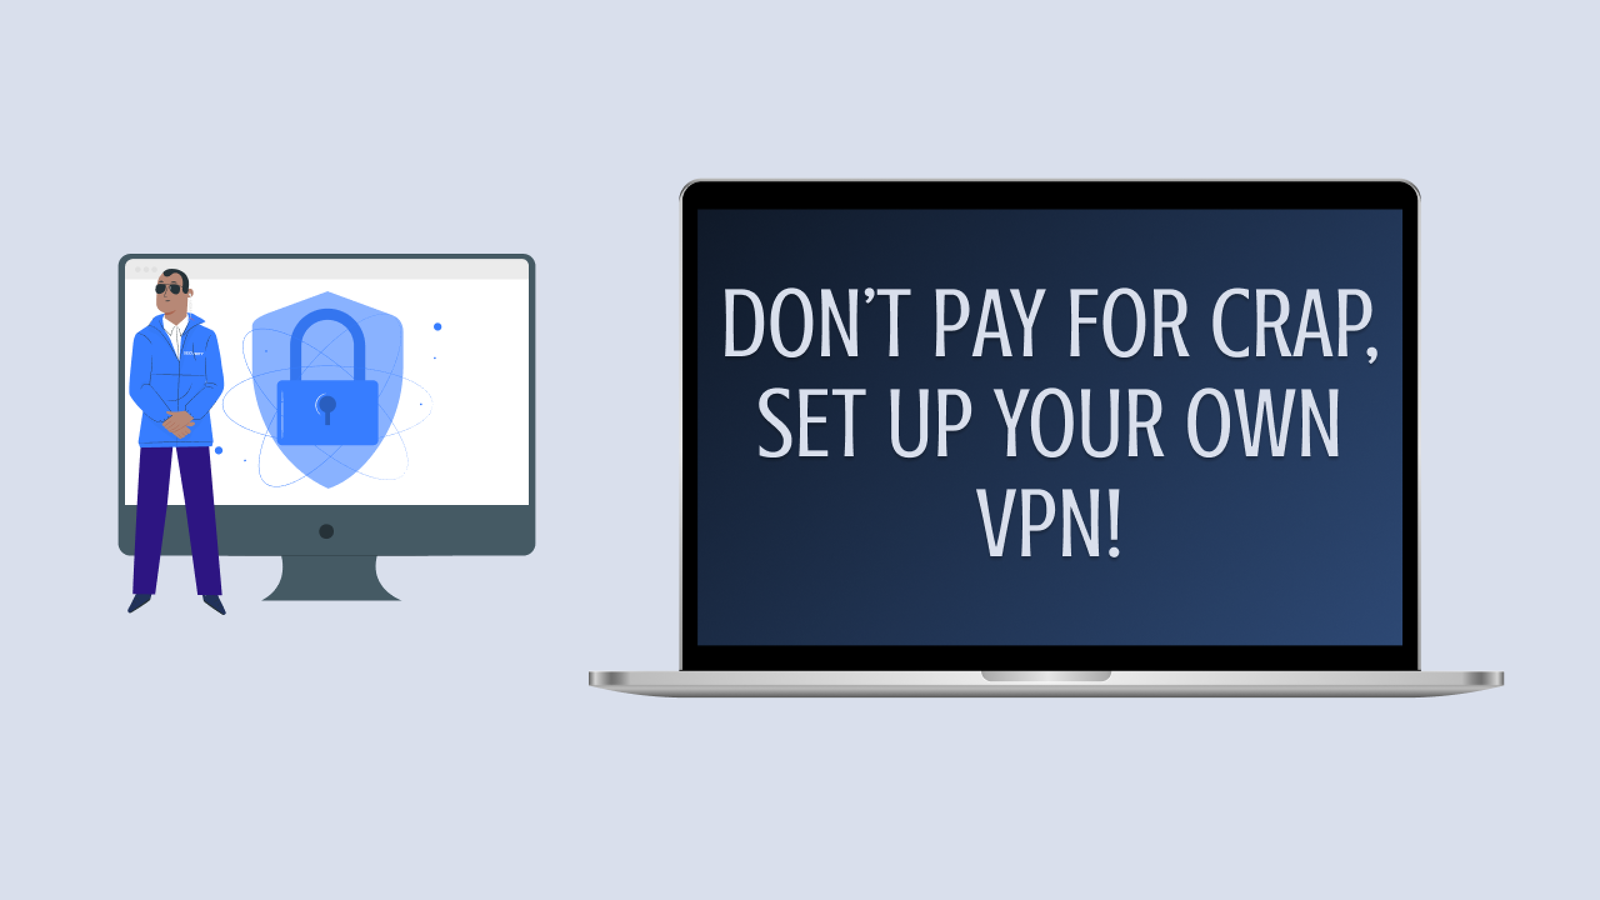 Don’t Pay For Crap, Set Up Your Own VPN!